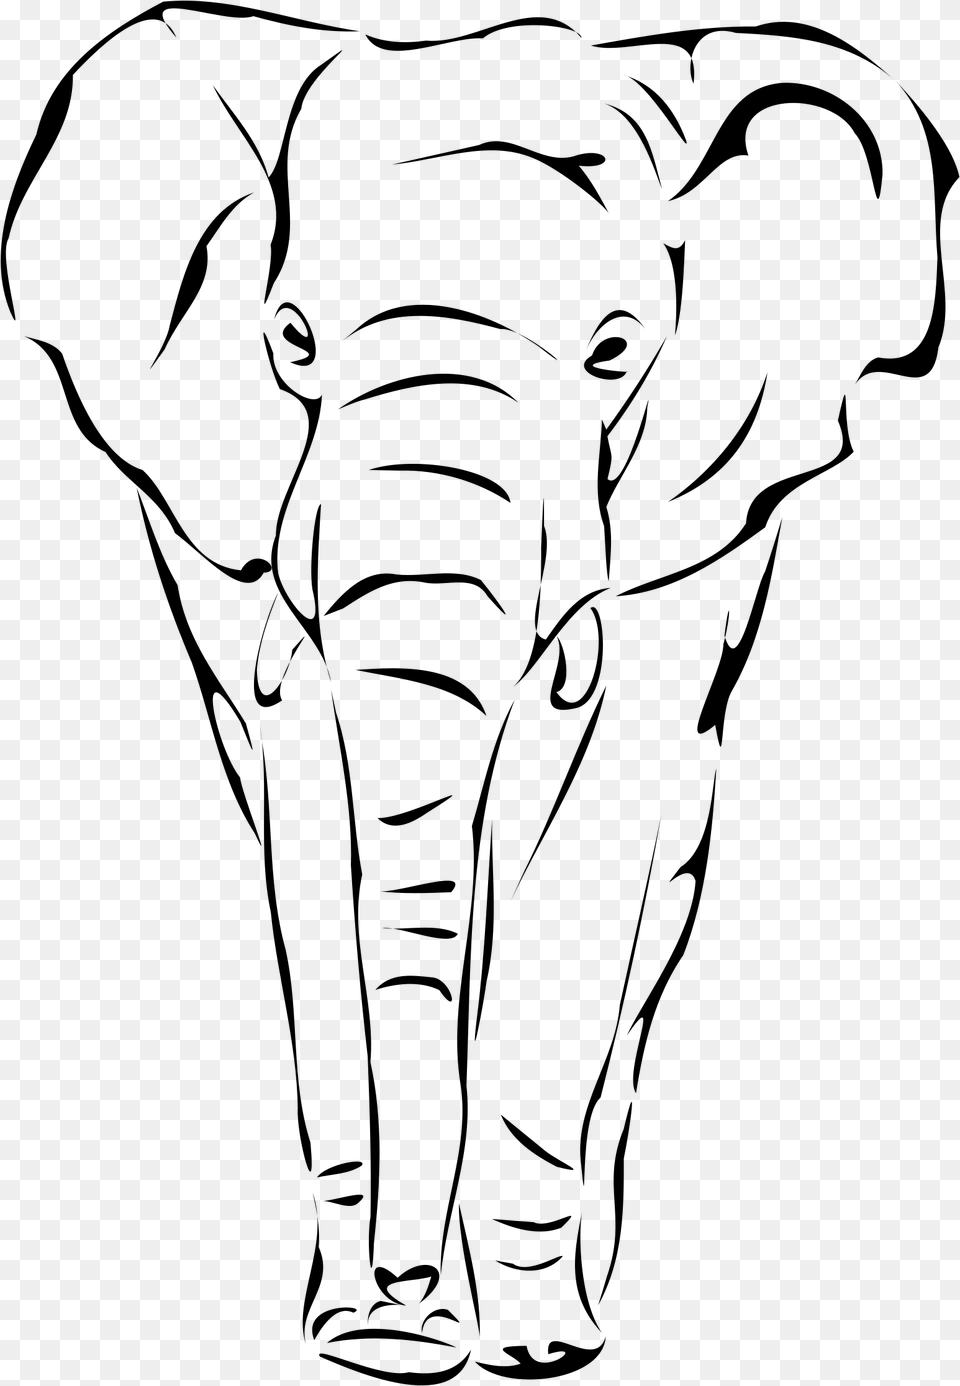 Elephant Face Drawing At Getdrawings Elephant Head On Outline, Gray Free Png Download